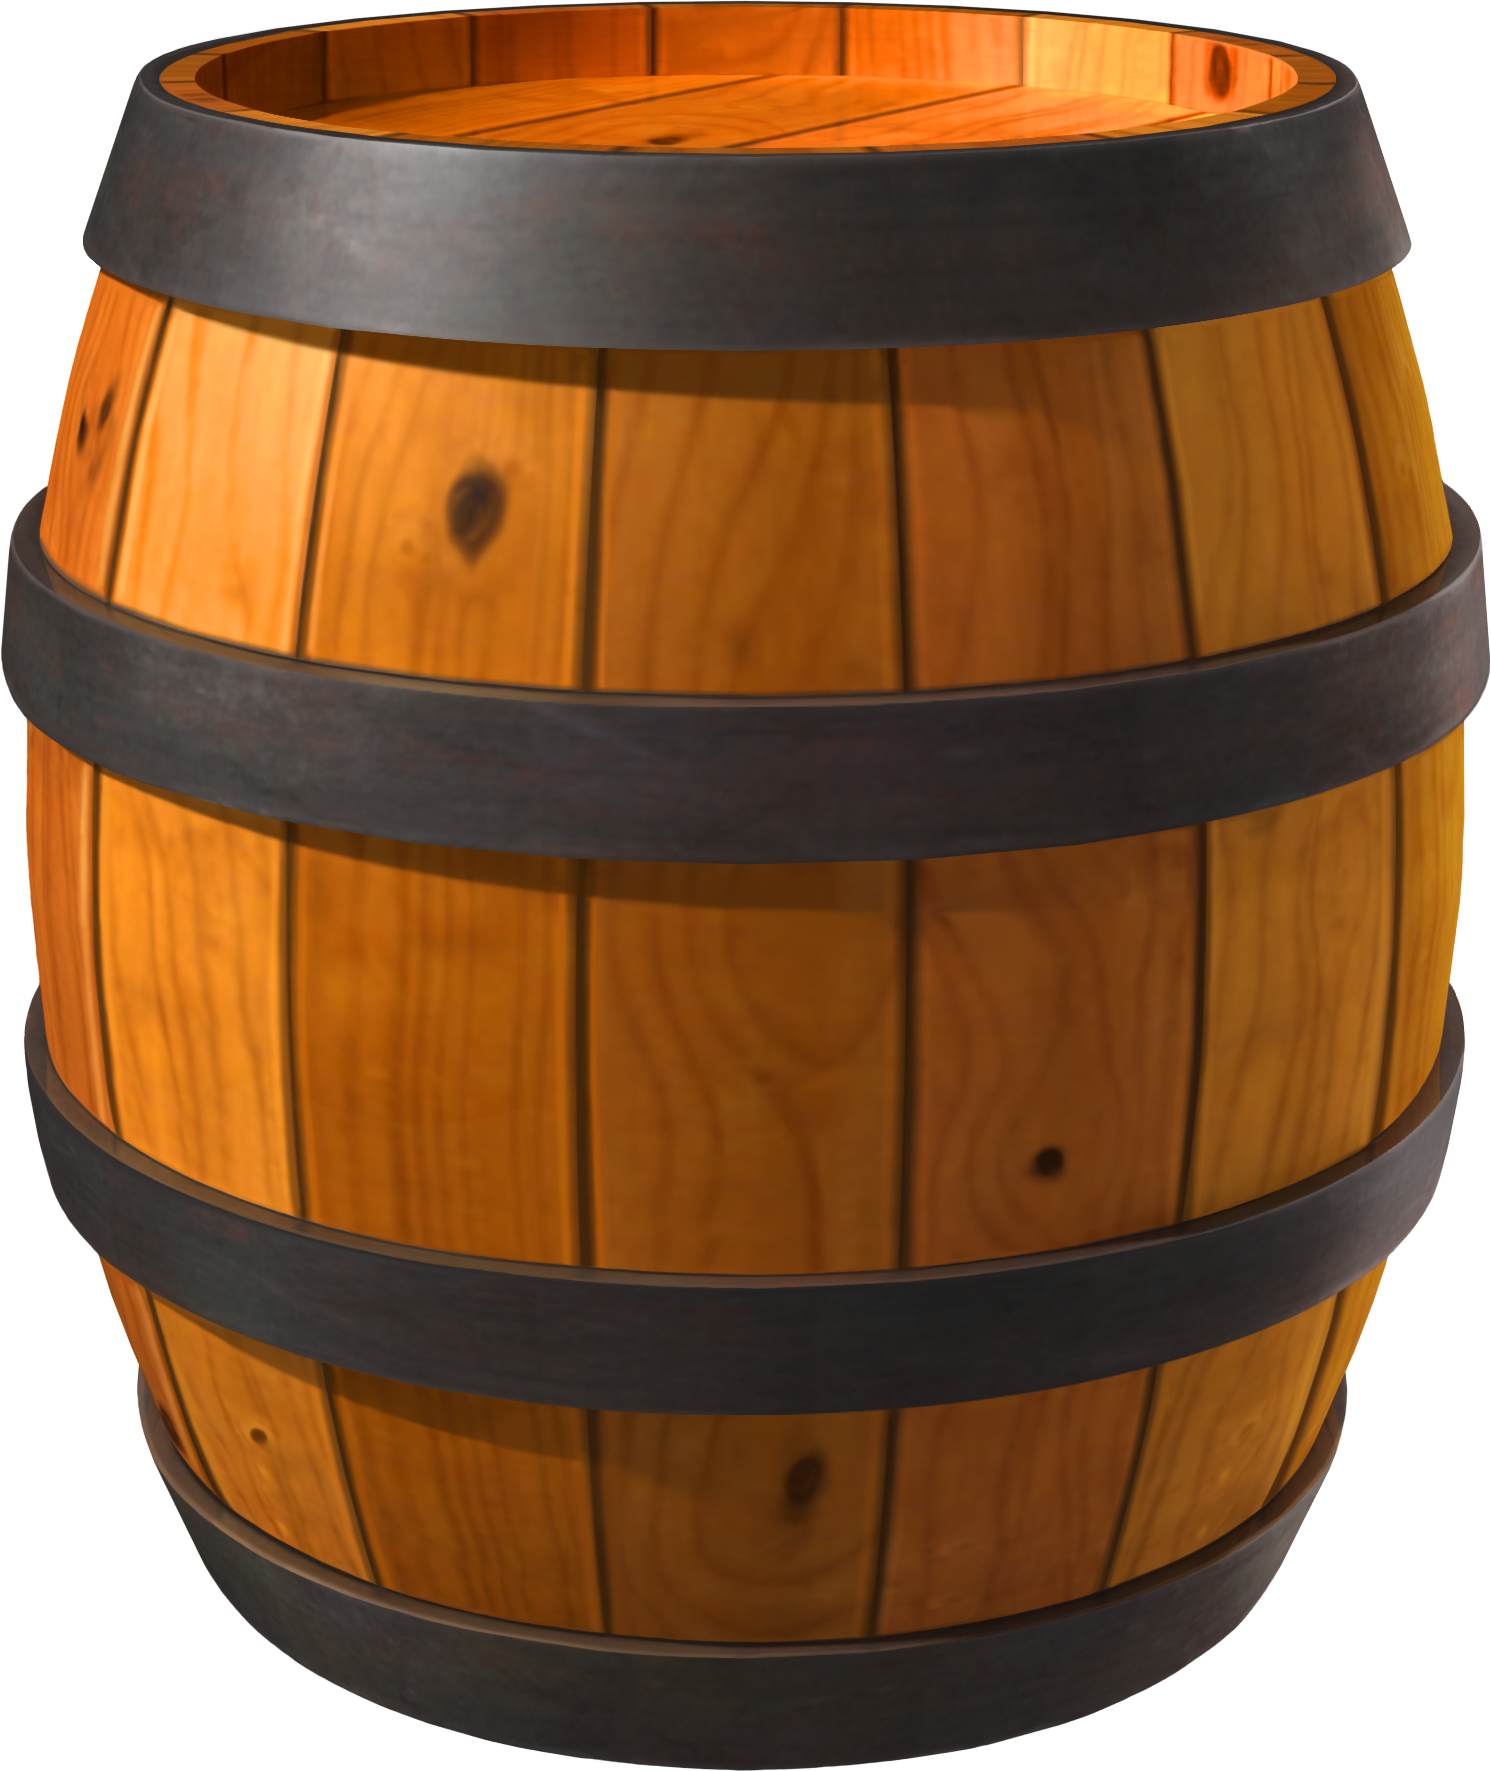 Amazing Barrel Pictures & Backgrounds